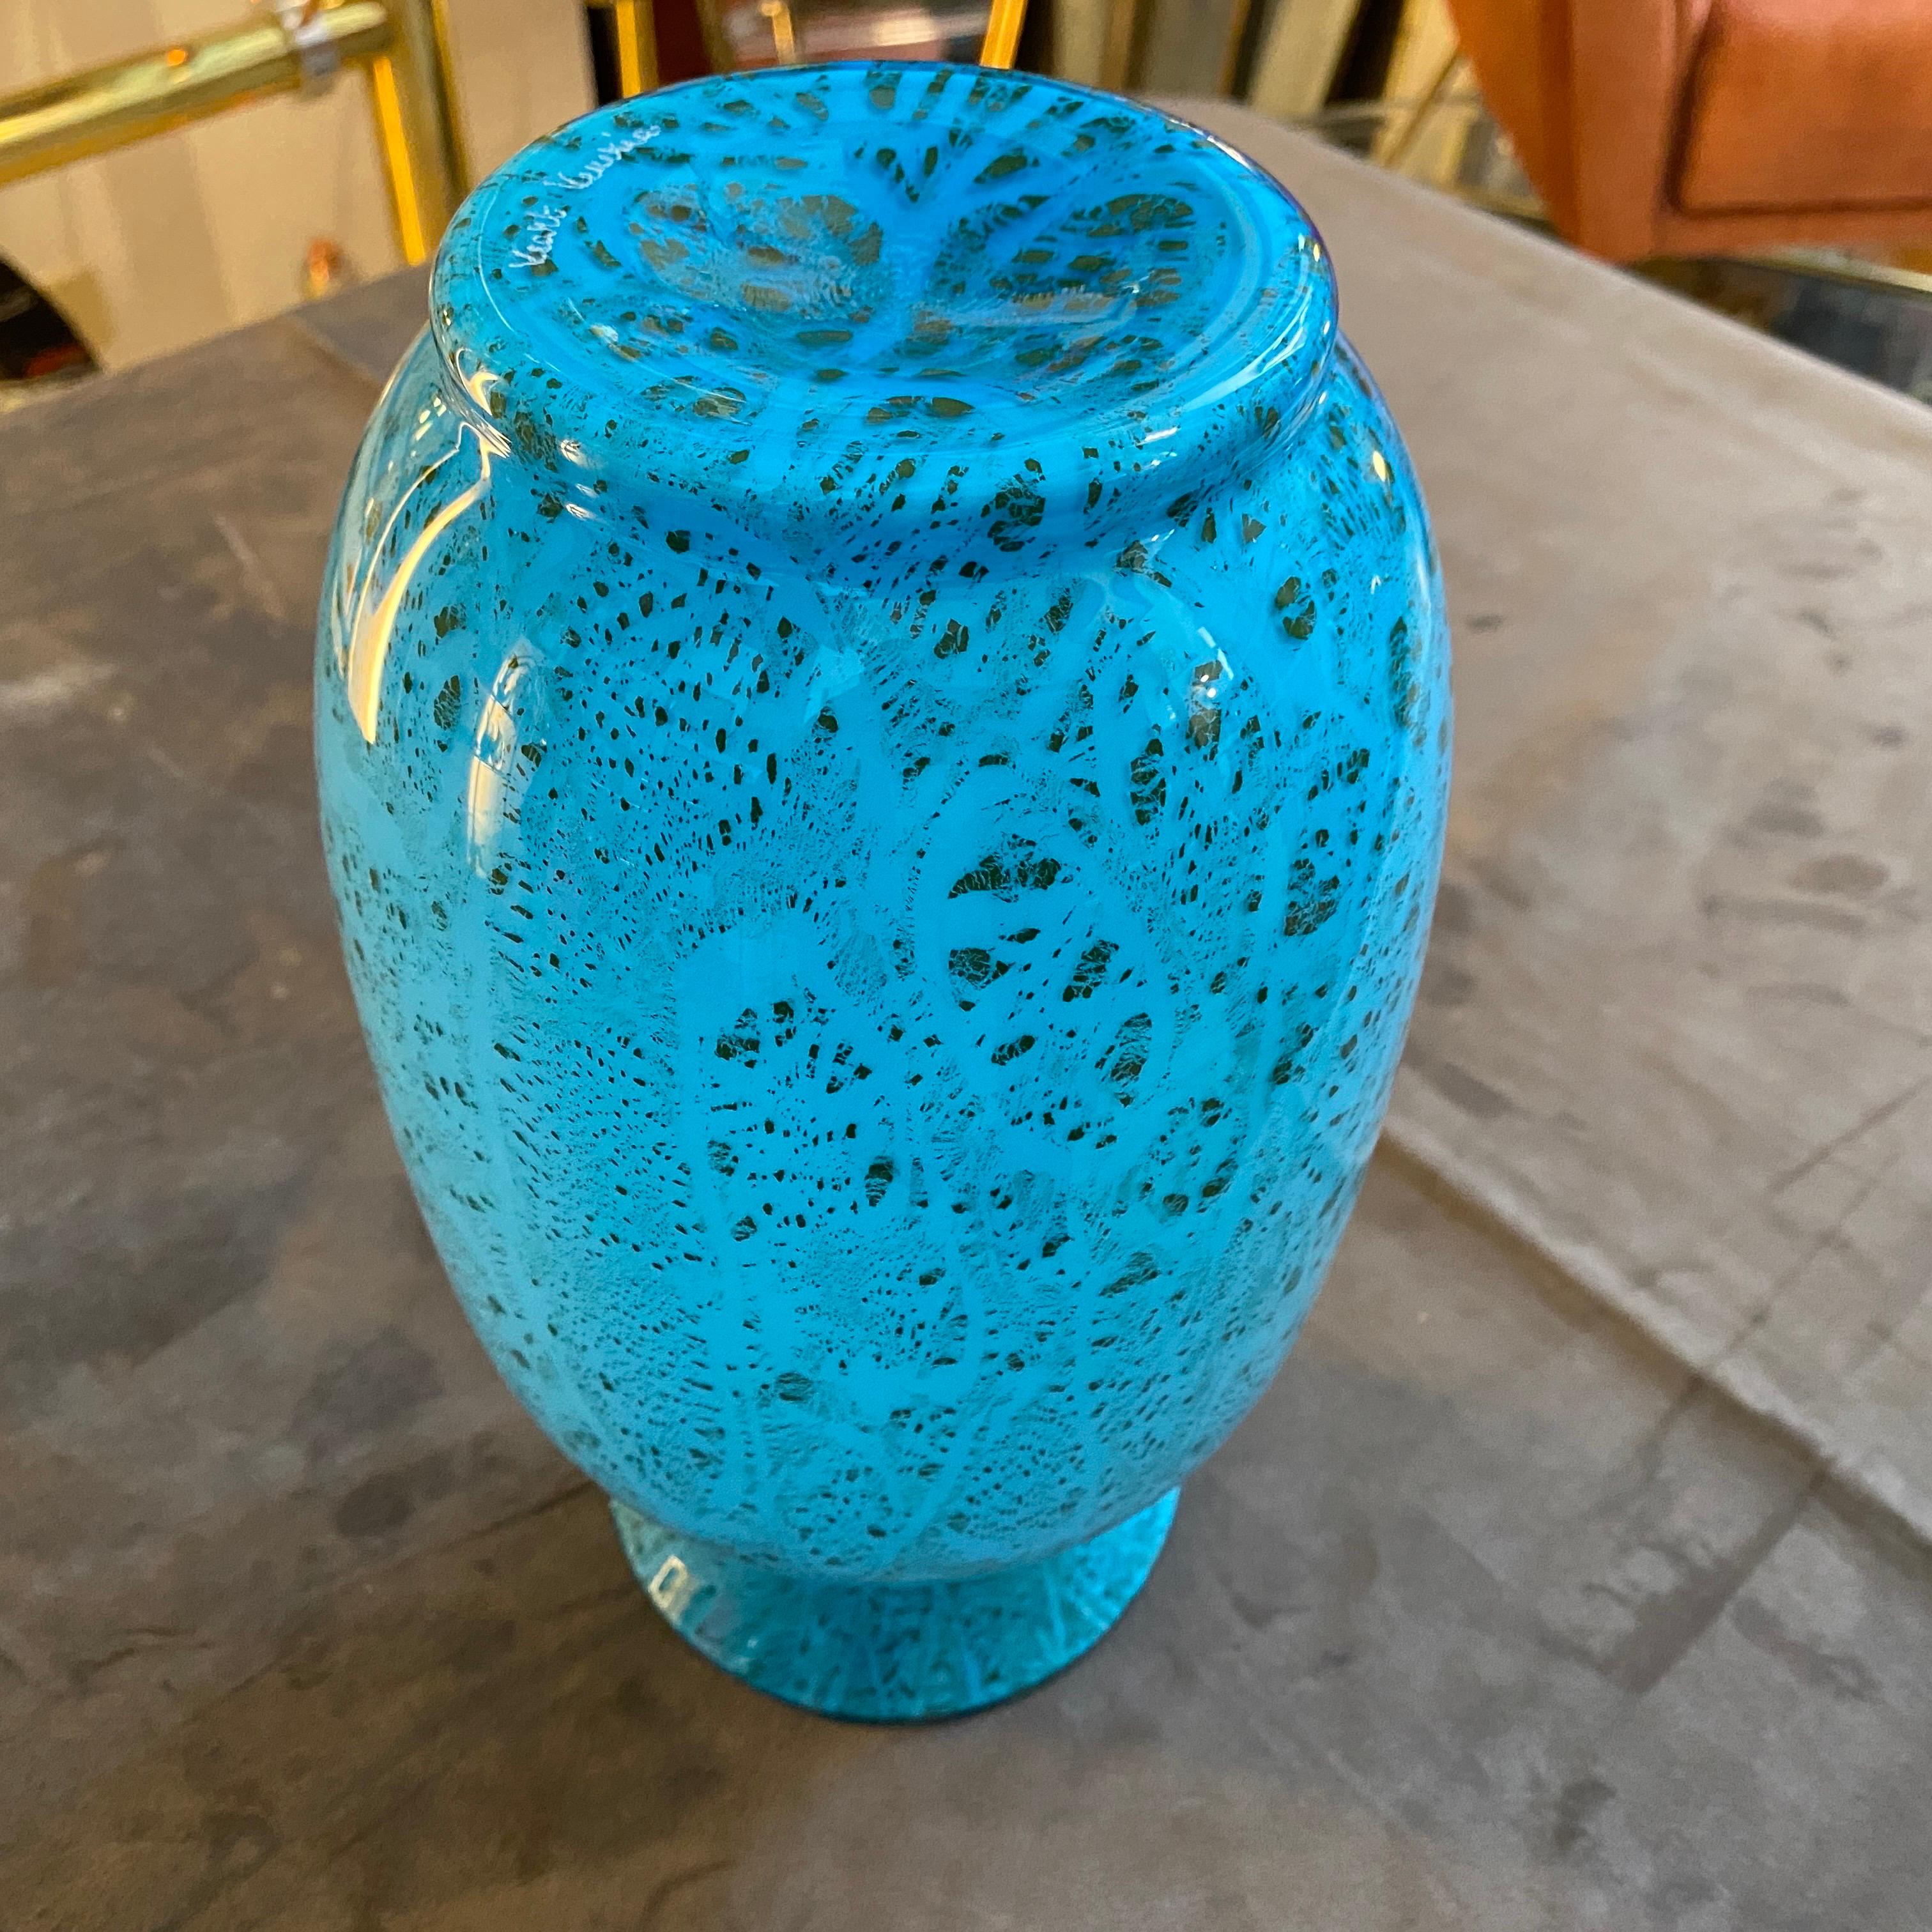 1980s Modernist Turquoise and Black Murano Glass Vase by VeArt In Excellent Condition For Sale In Aci Castello, IT